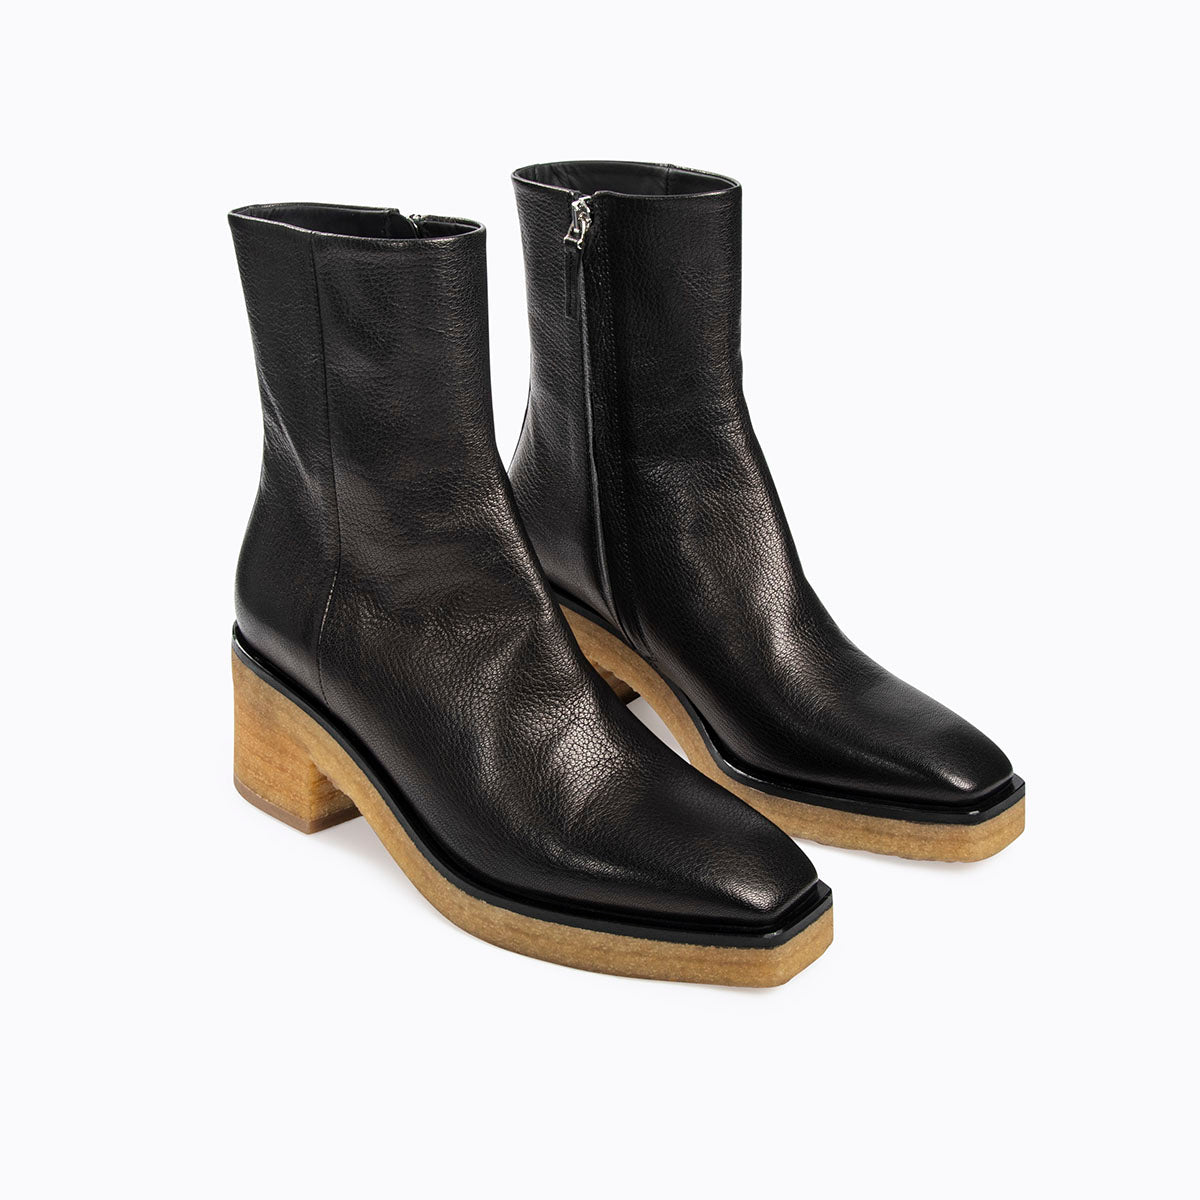 JIM FOLK heeled ankle boots for women in black leather — PIERRE HARDY